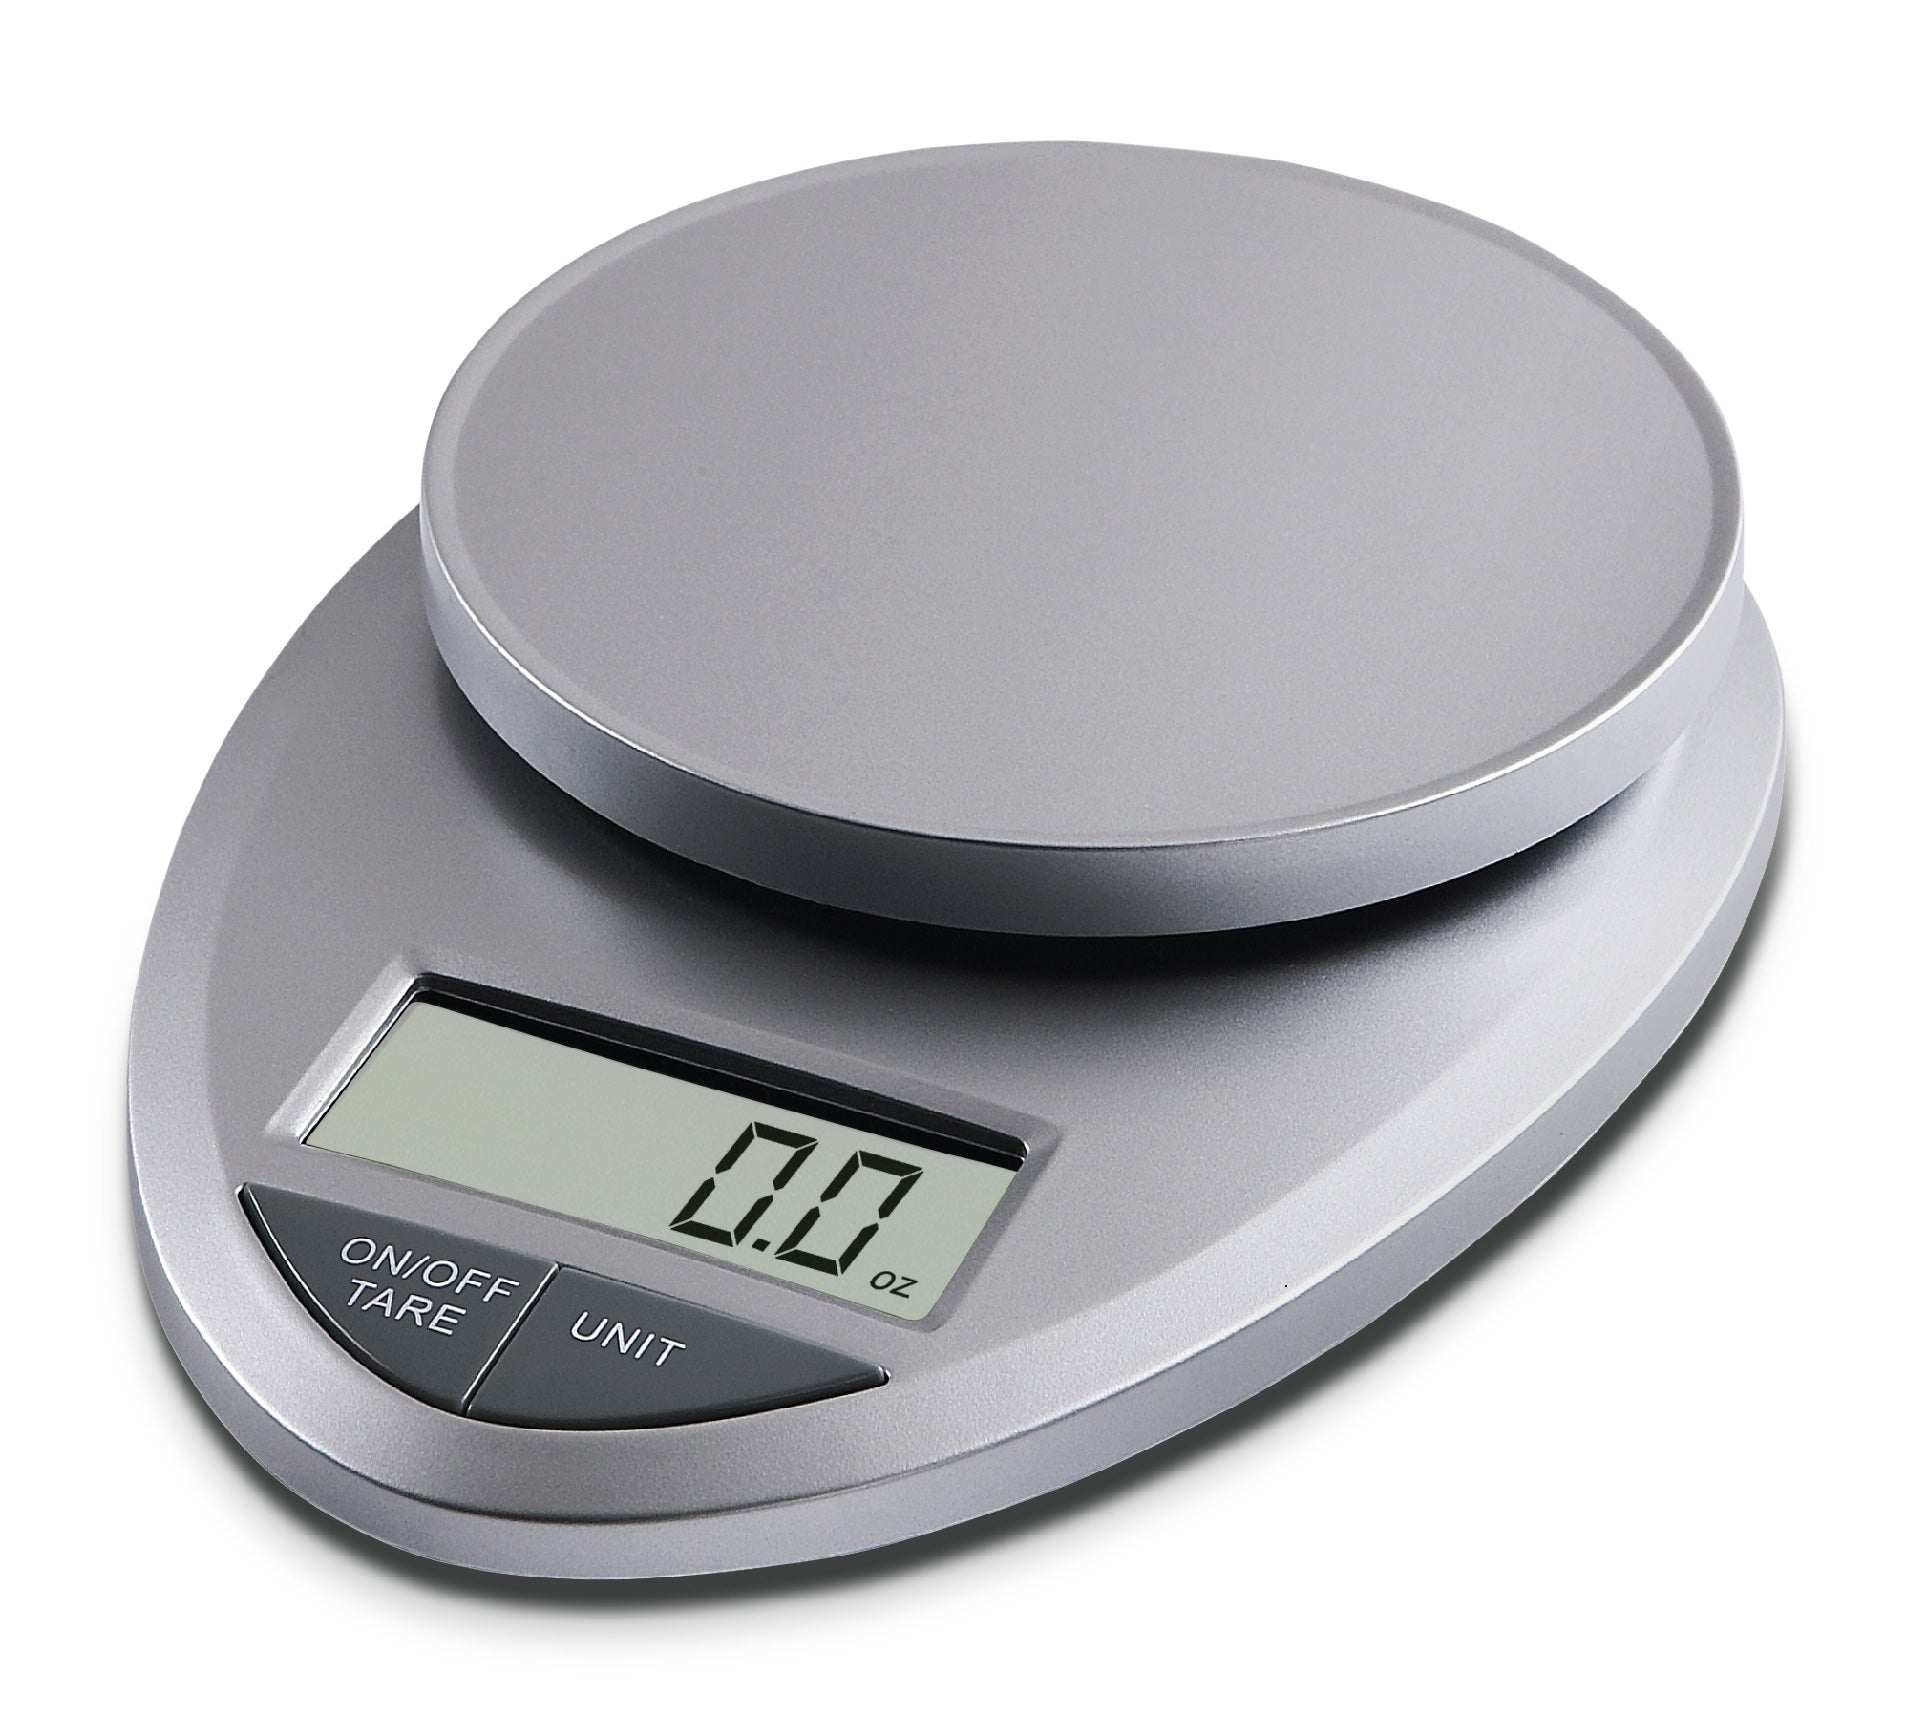 Count Calories with Eat Smart Precision Pro digital kitchen scale #review -  A Hen's Nest - NW PA Single Woman Mom Blog